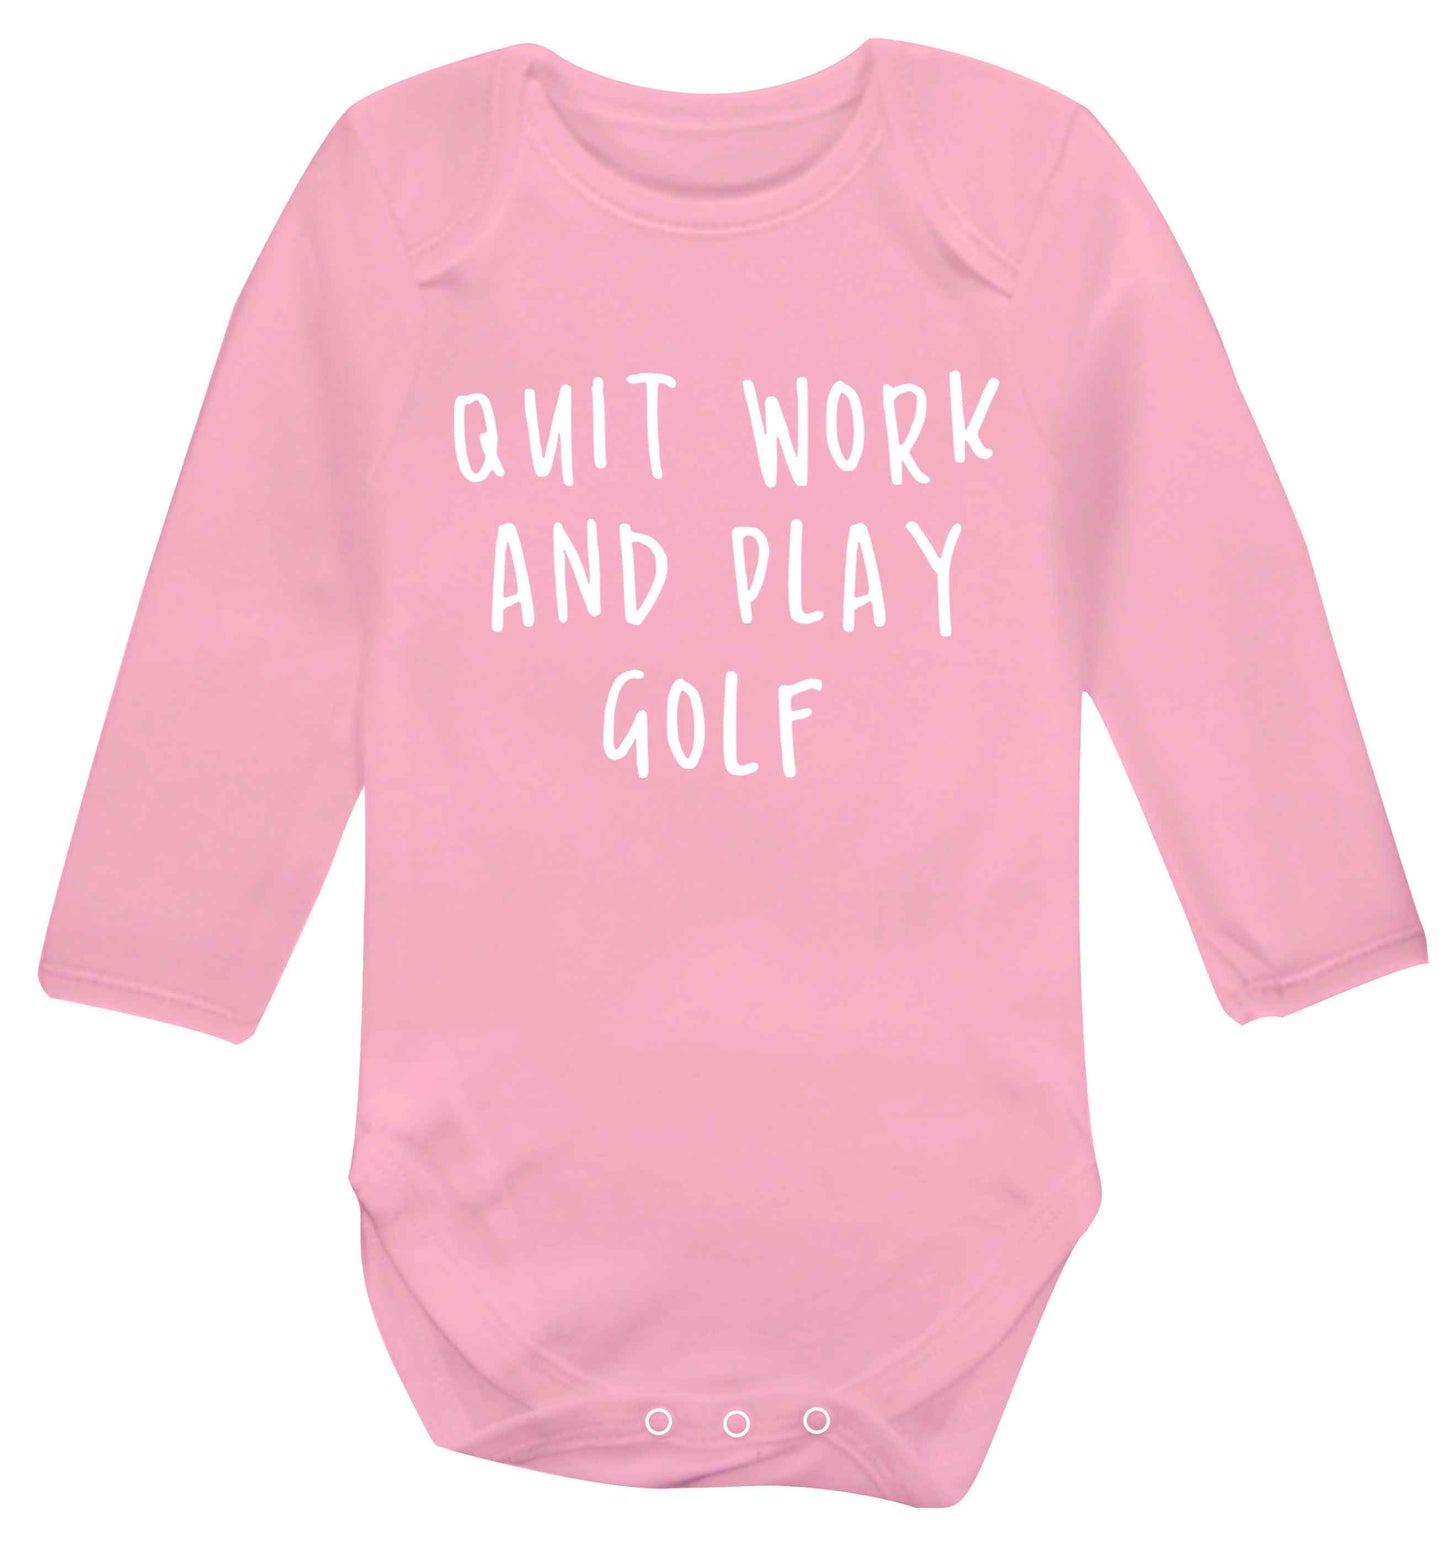 Quit work and play golf Baby Vest long sleeved pale pink 6-12 months